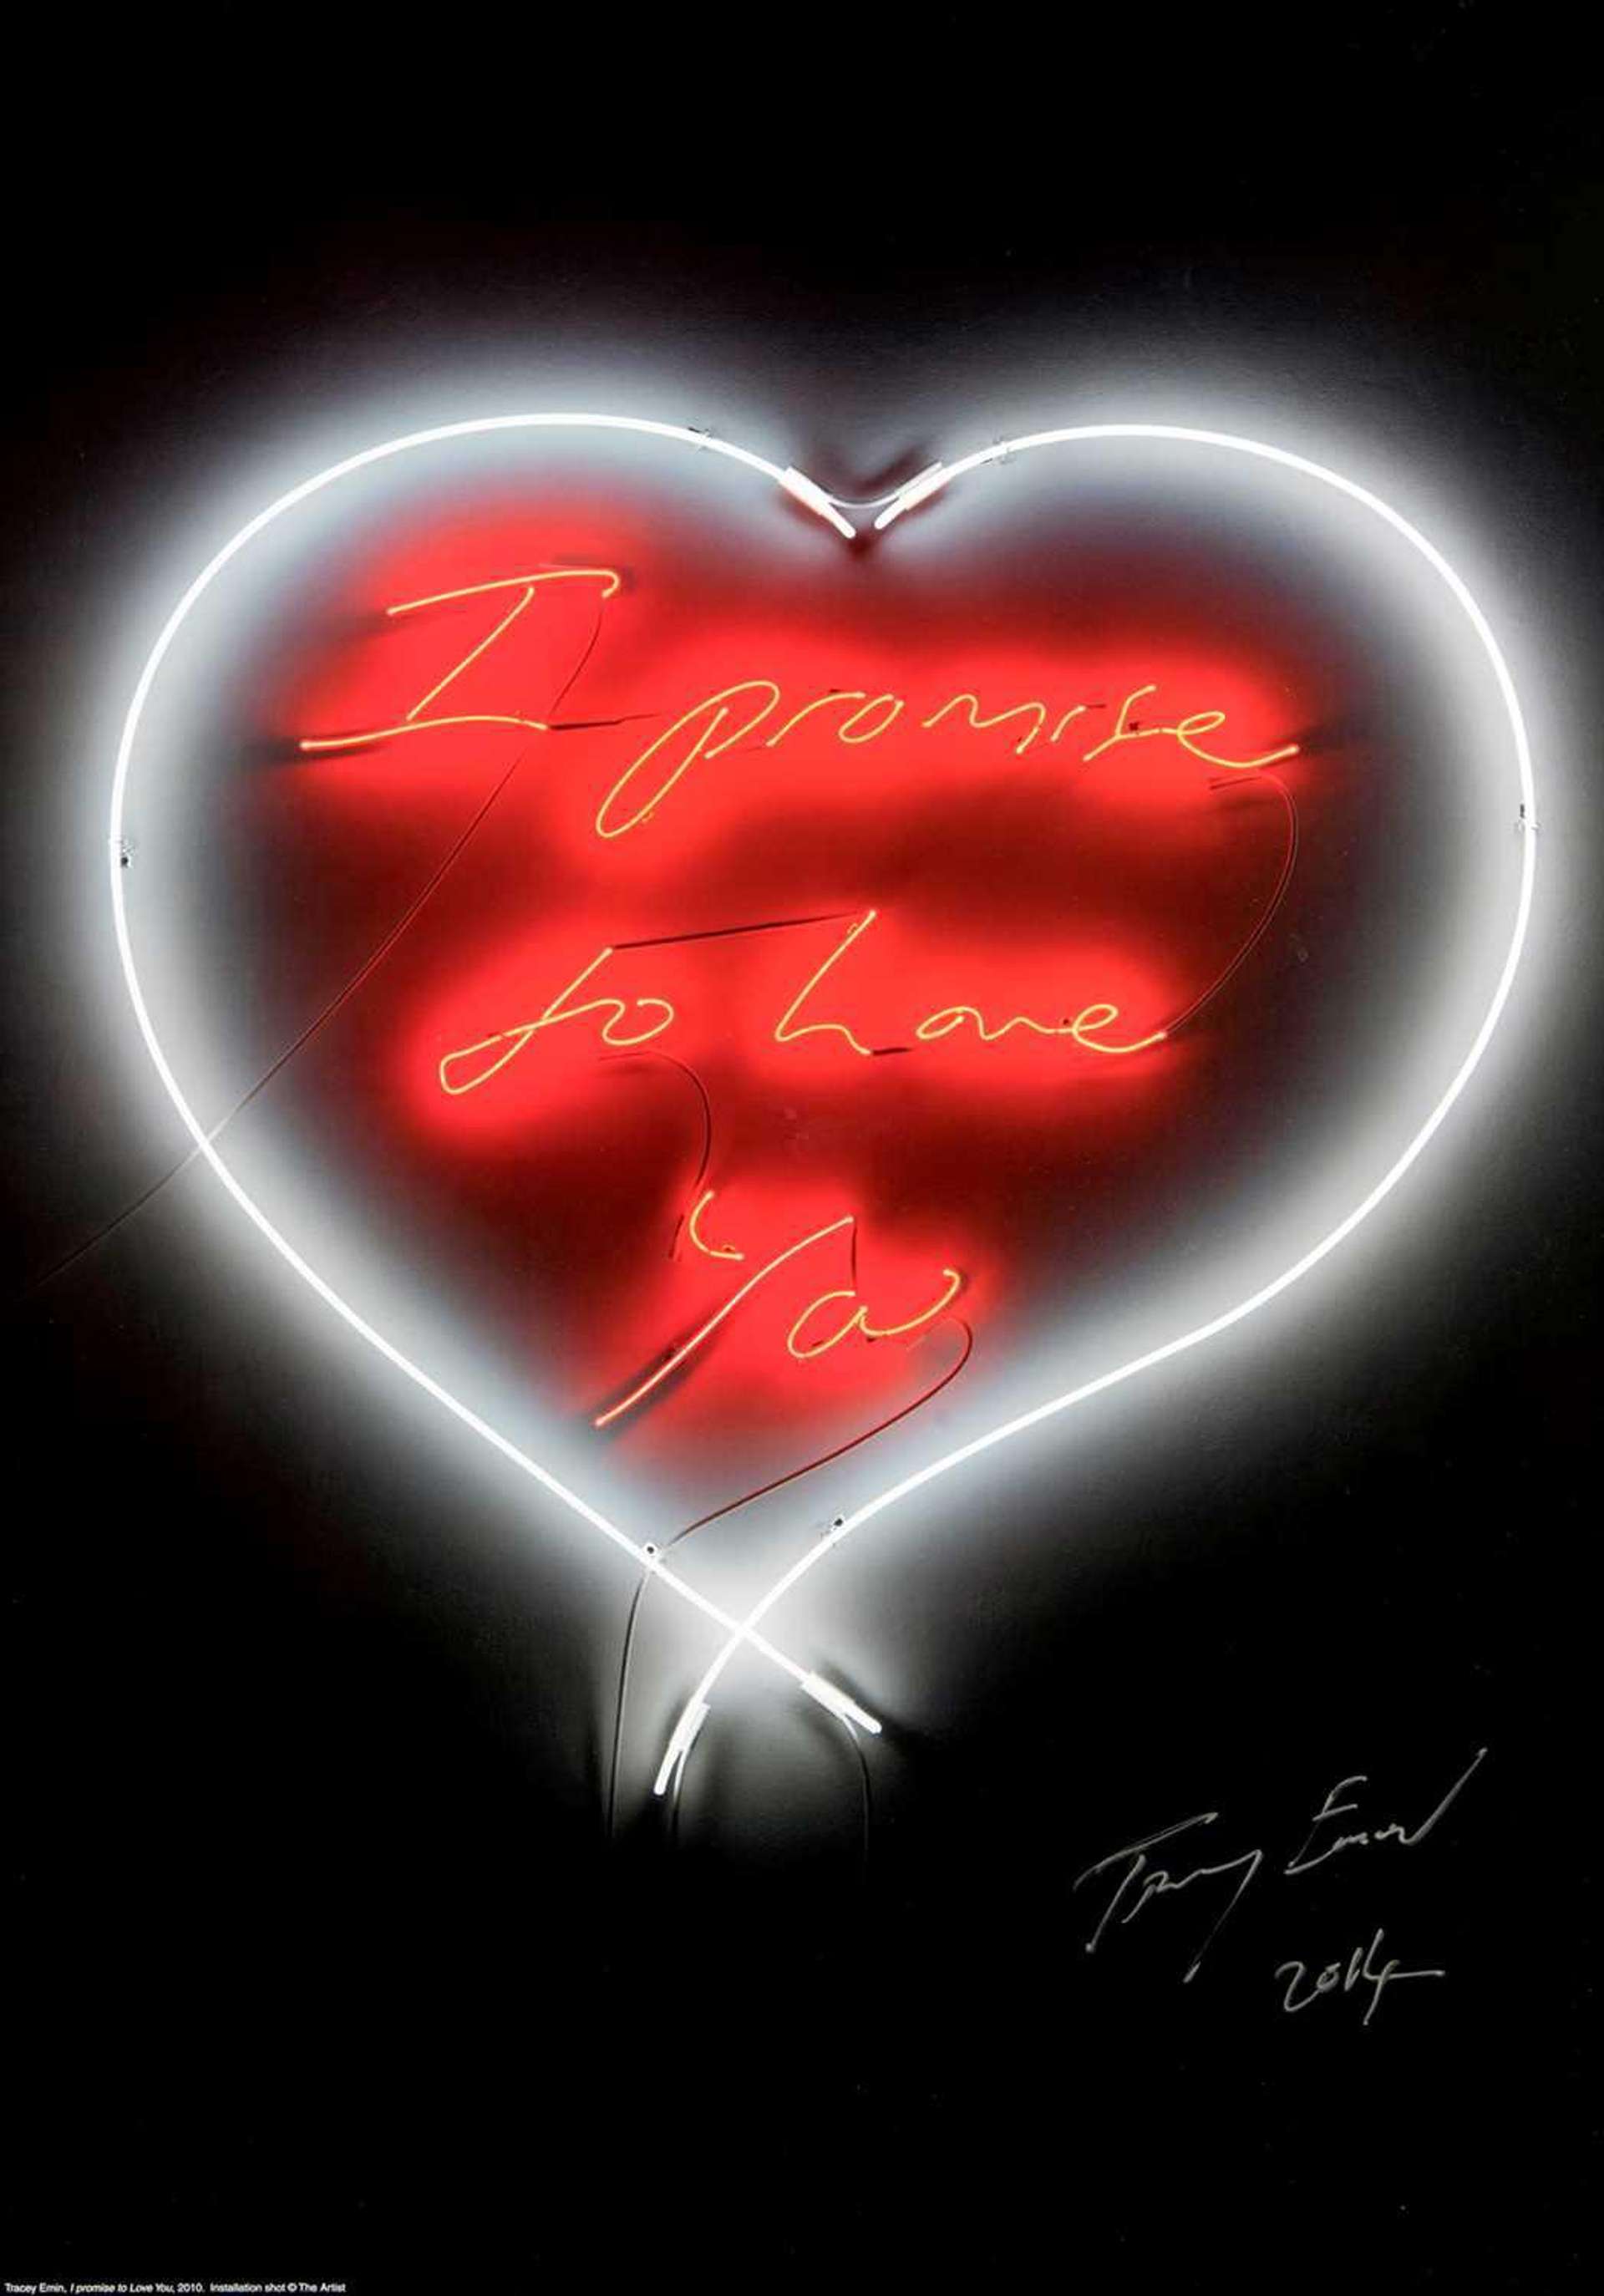 I Promise To Love You by Tracey Emin